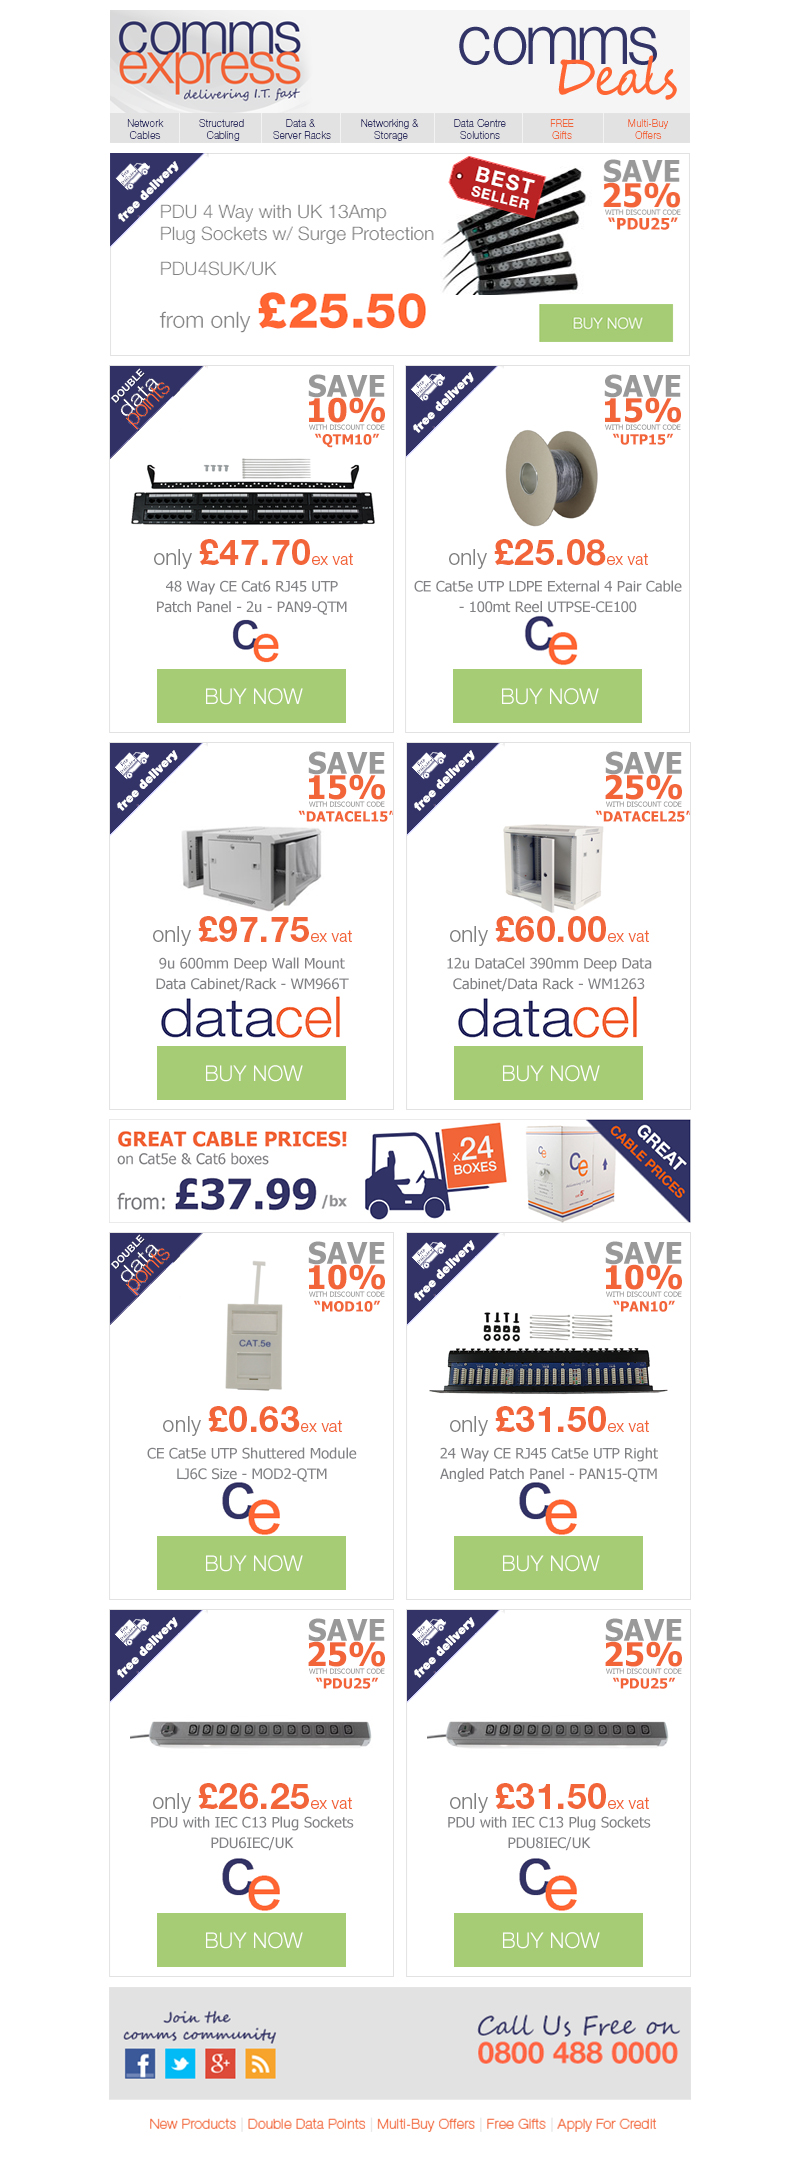 Comms Deals: Great Savings on CE Network Solutions & Da